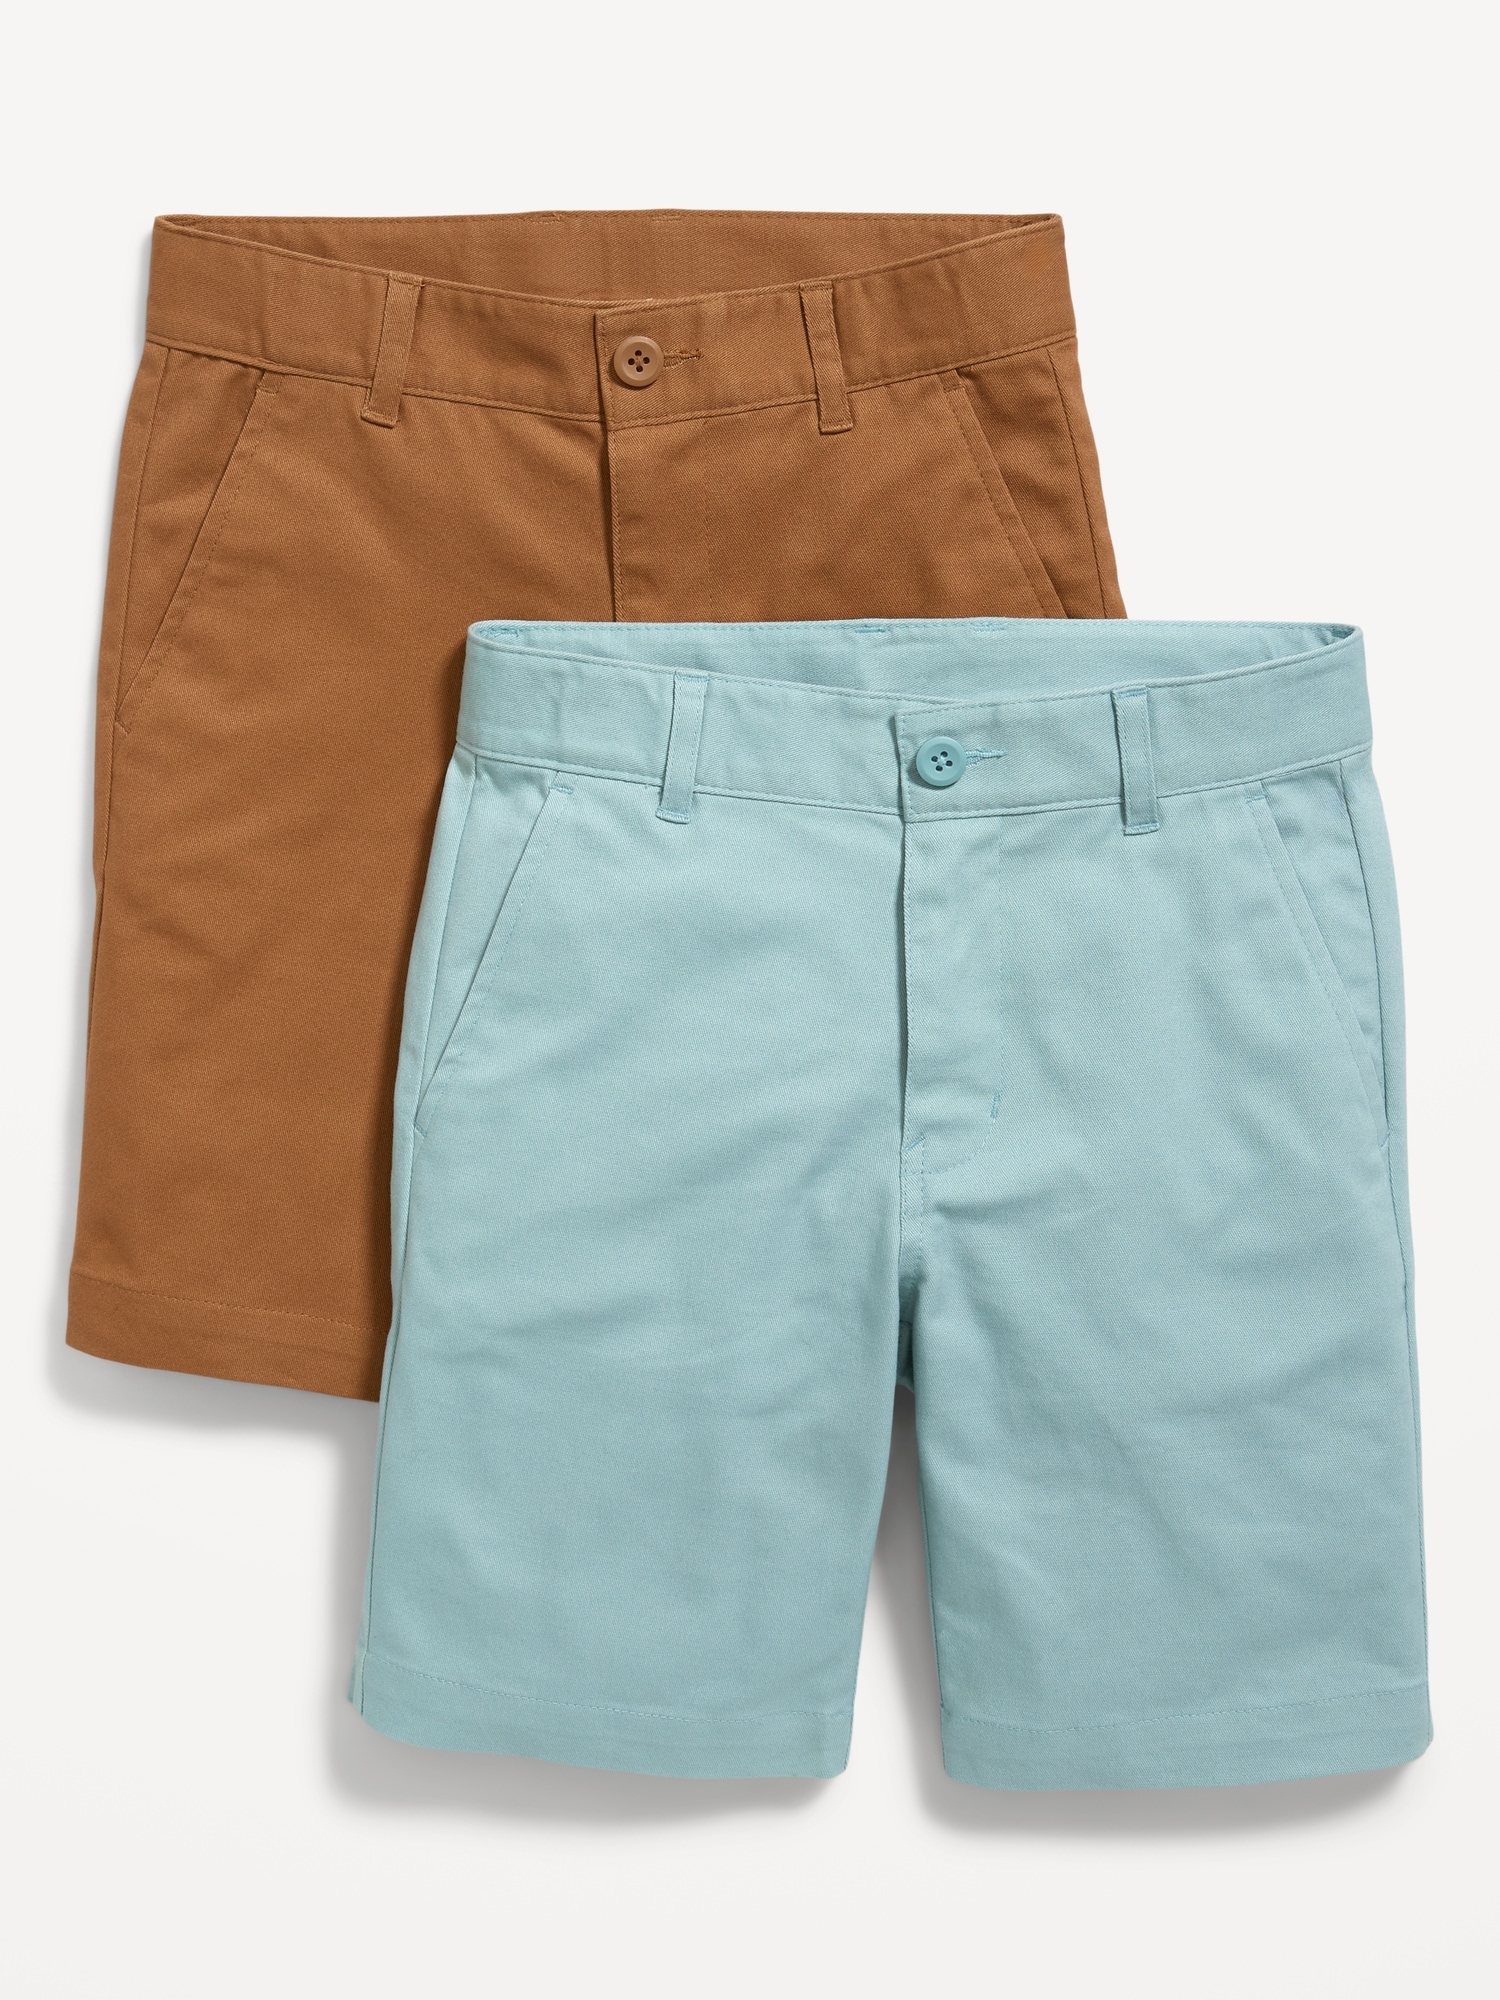 Uniform Twill Shorts 2-Pack for Boys (At Knee) Hot Deal